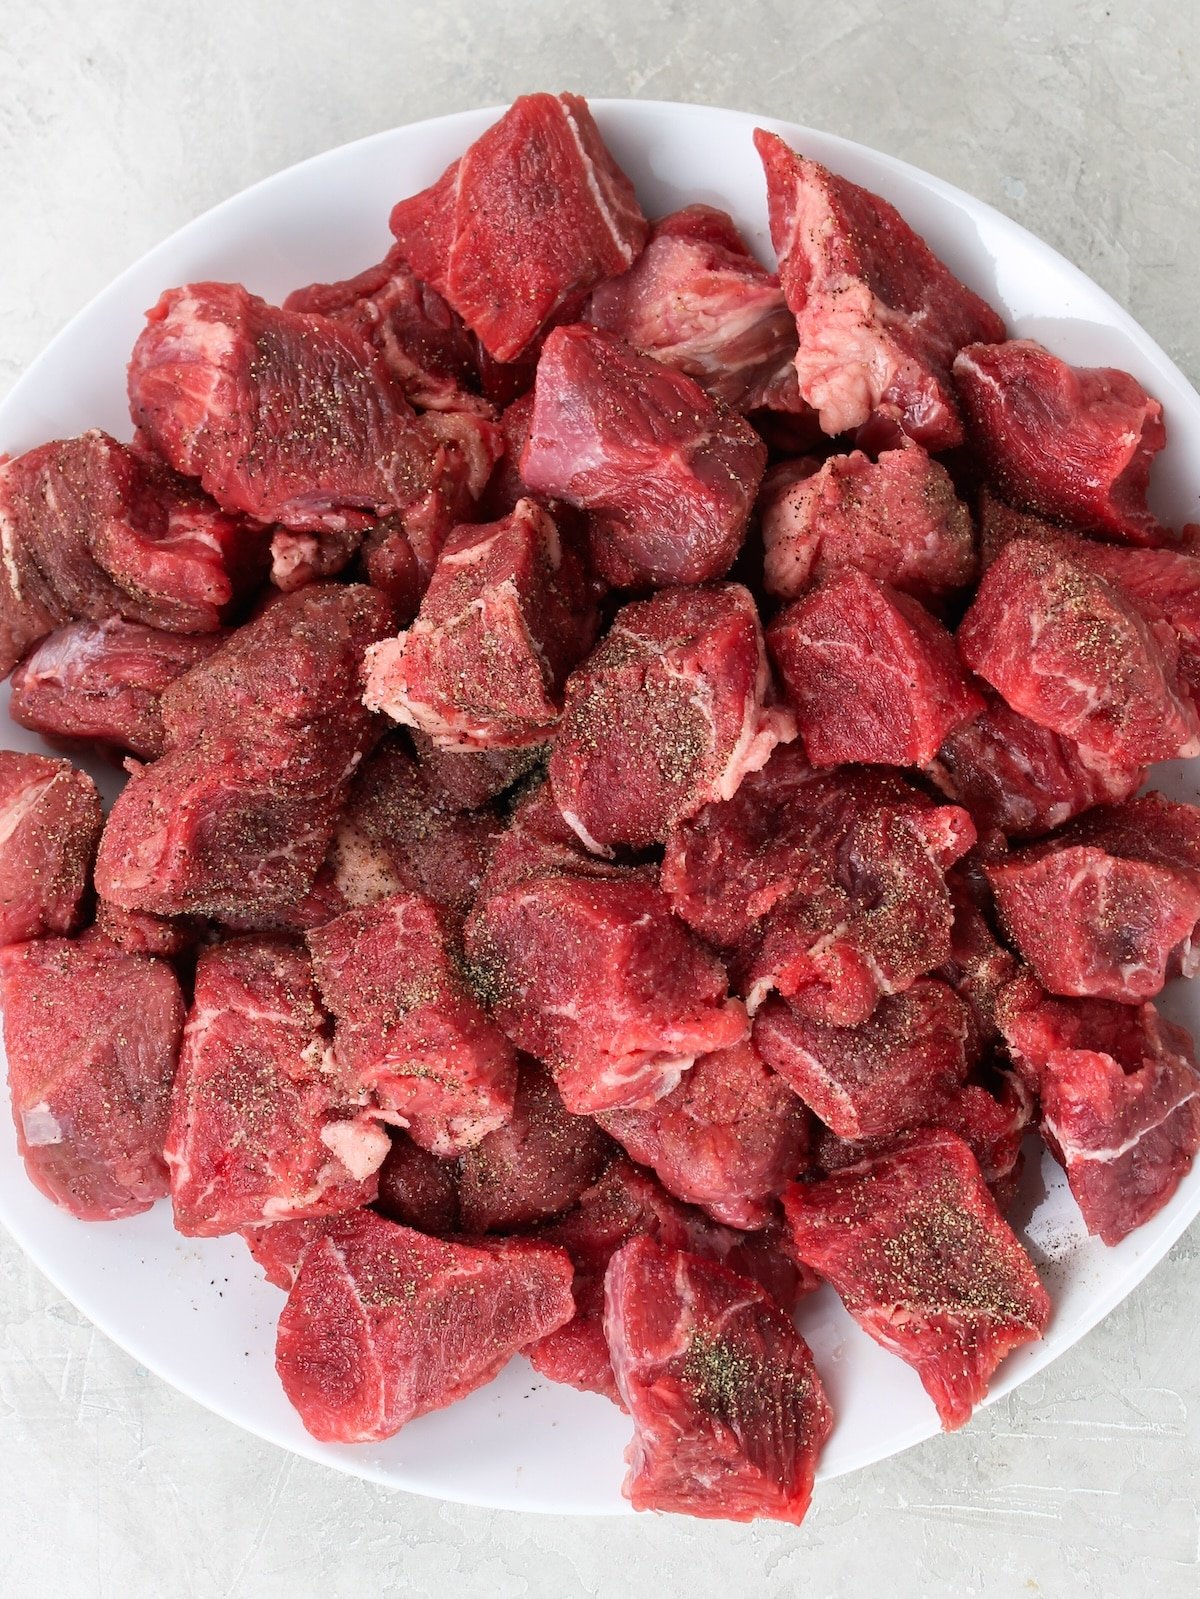 A beef chuck roast that's cut up into cubes.